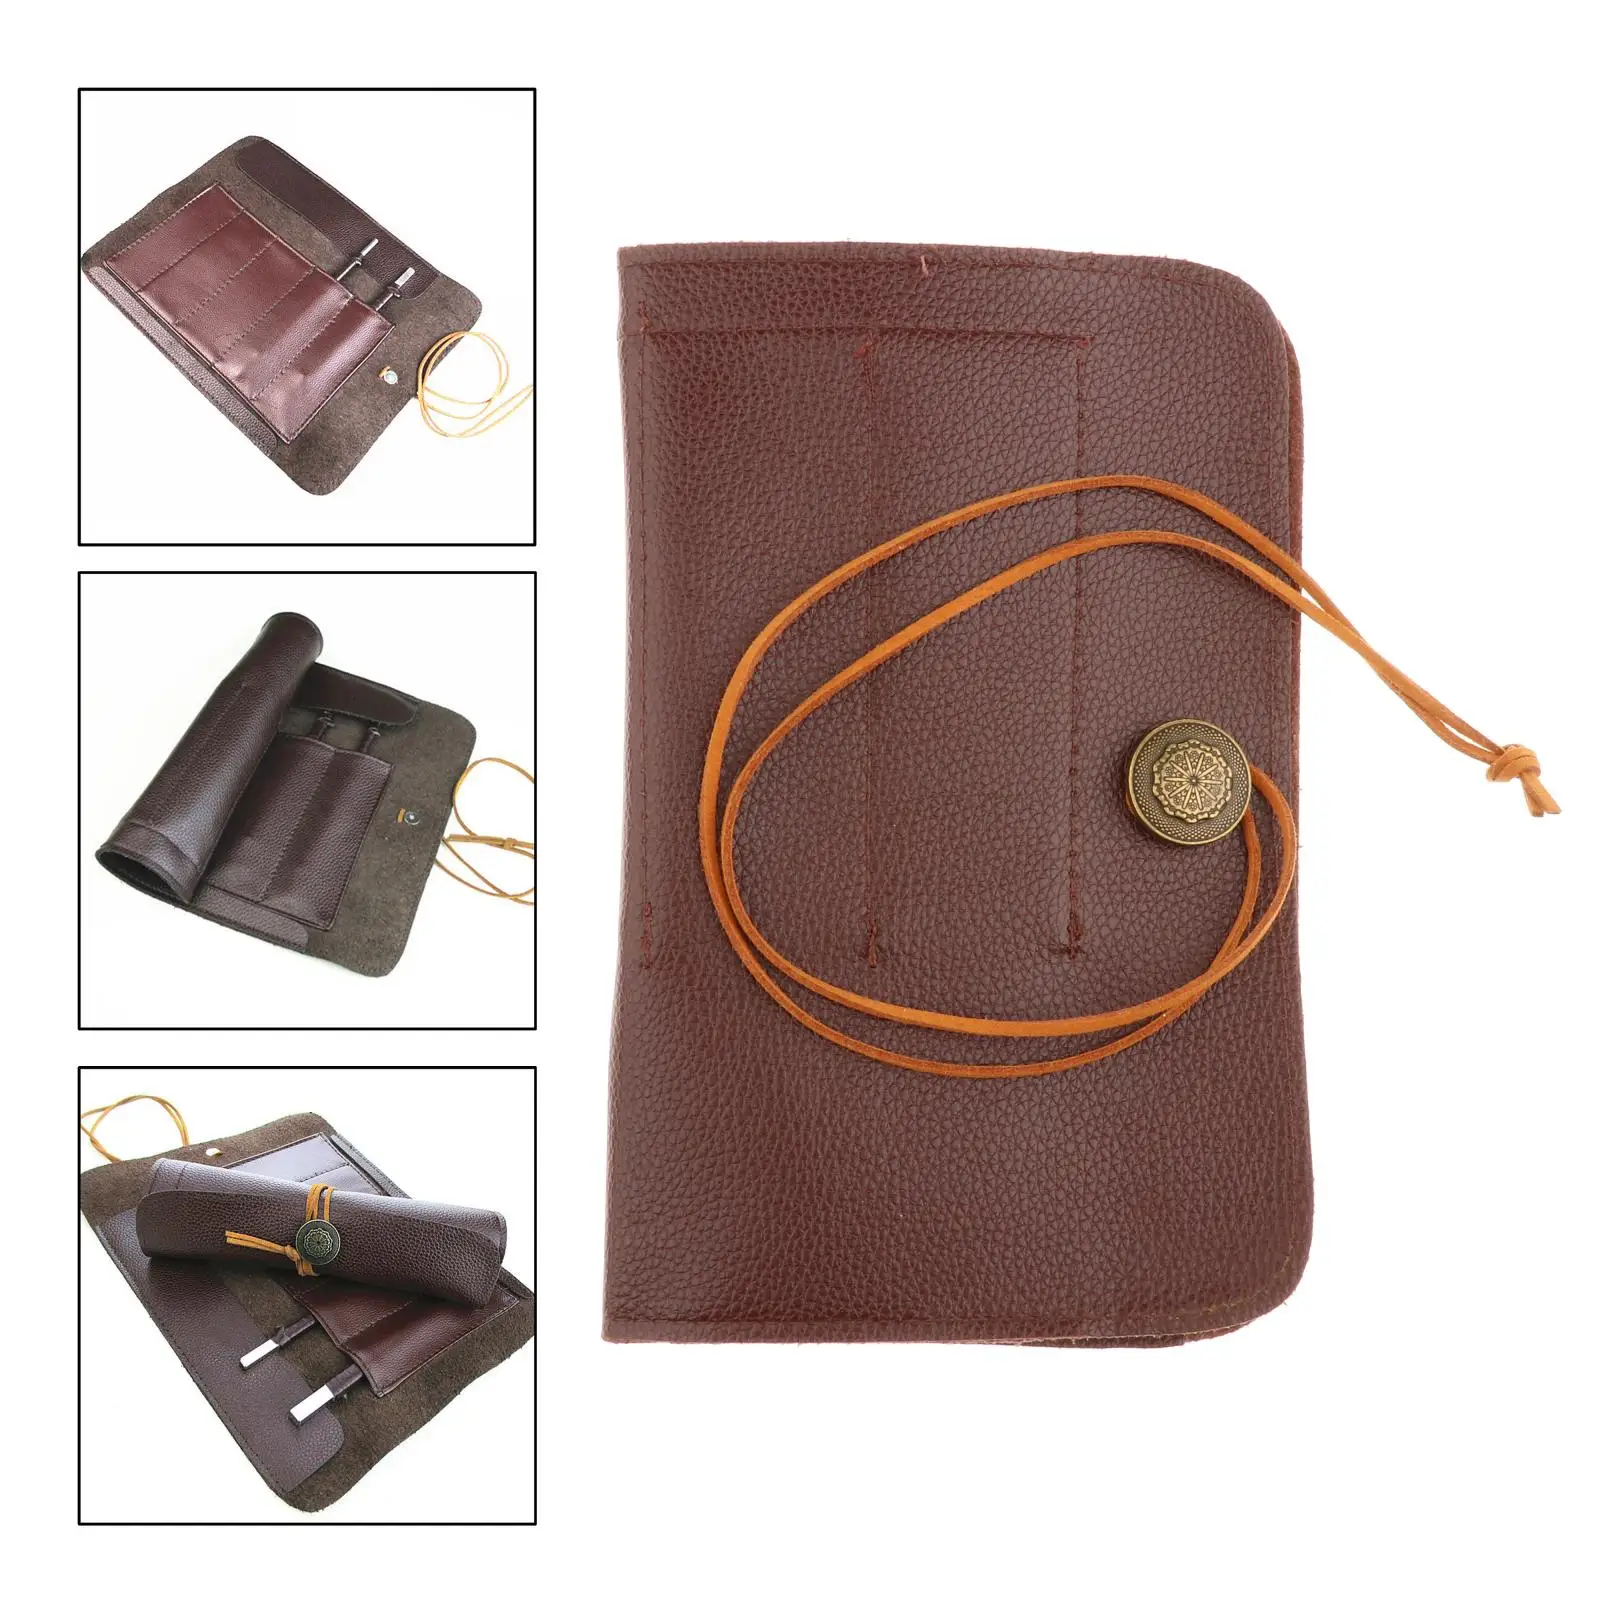 Details about   Pocket Knives Storage Leather Roll Up Bag Cover Tools Organizer Free Shipping 